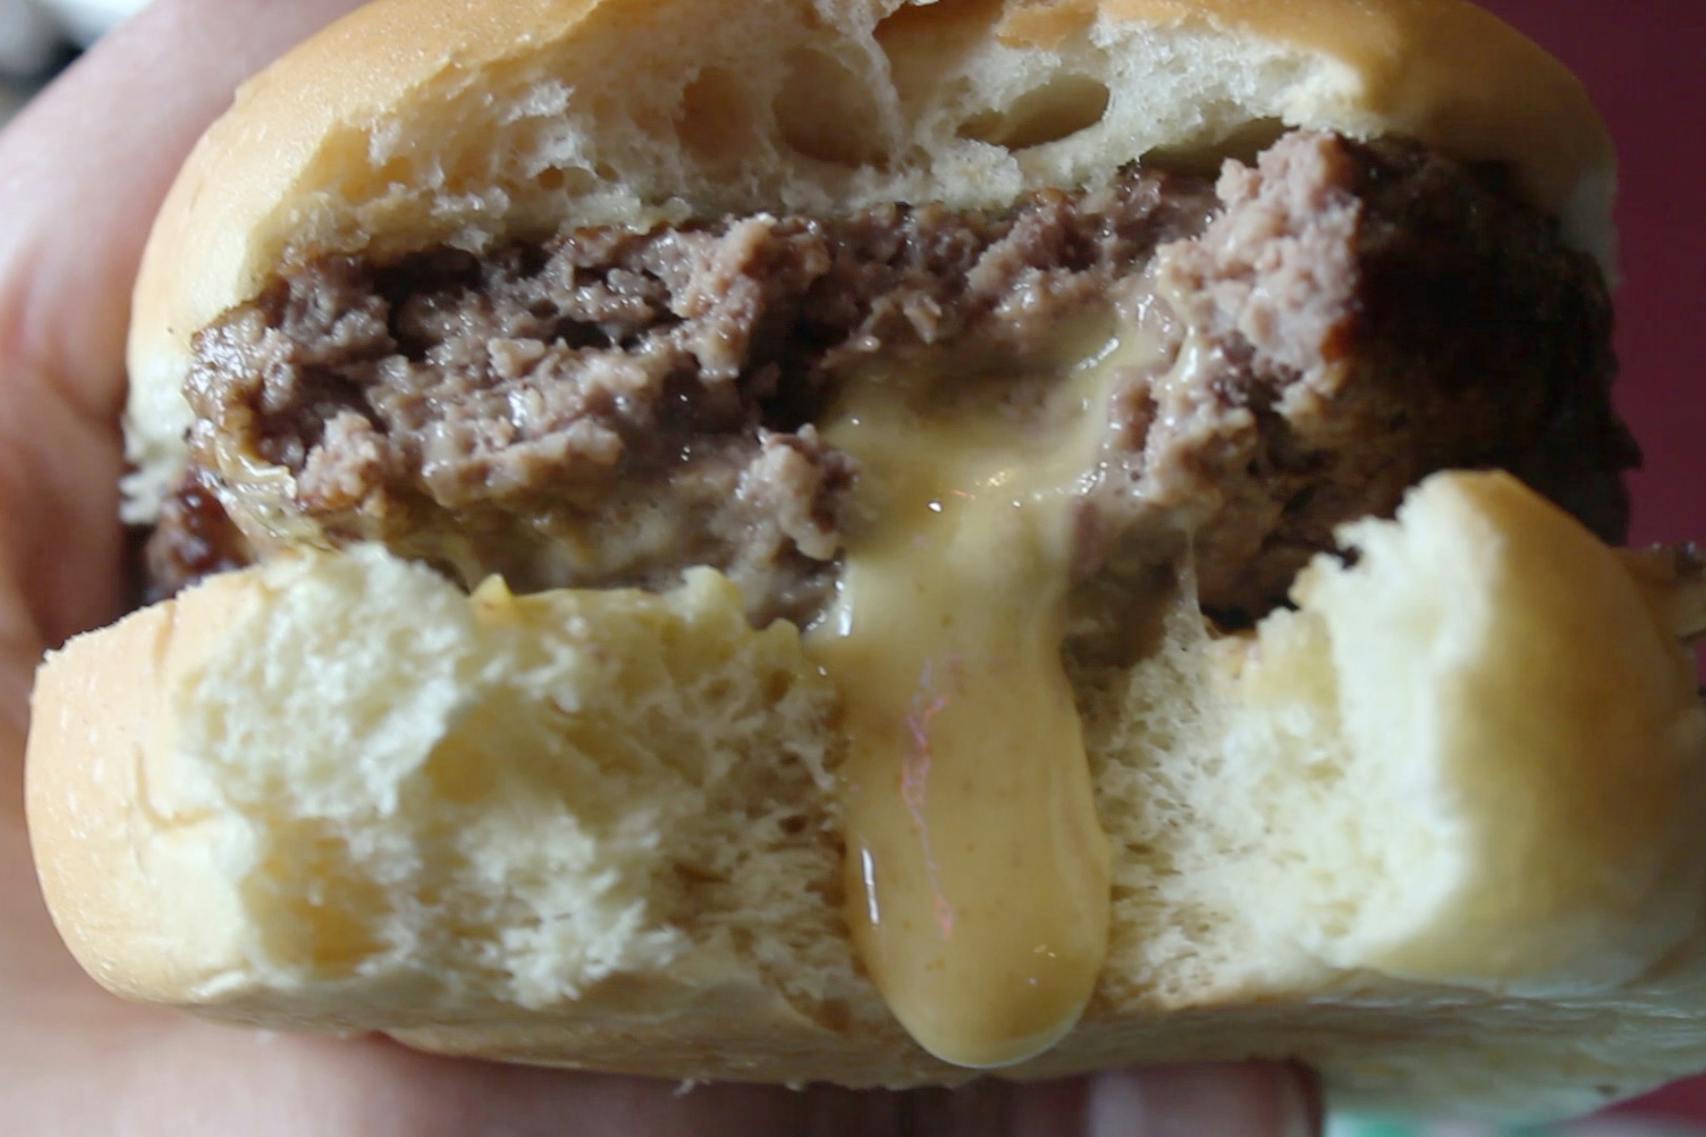 A finished “Juicy Lucy” at the 5-8 Club. ] MARK VANCLEAVE • mark.vancleave@startribune.com * Two south Minneapolis rivals lay claim to being the home of the Juicy or Jucy Lucy.